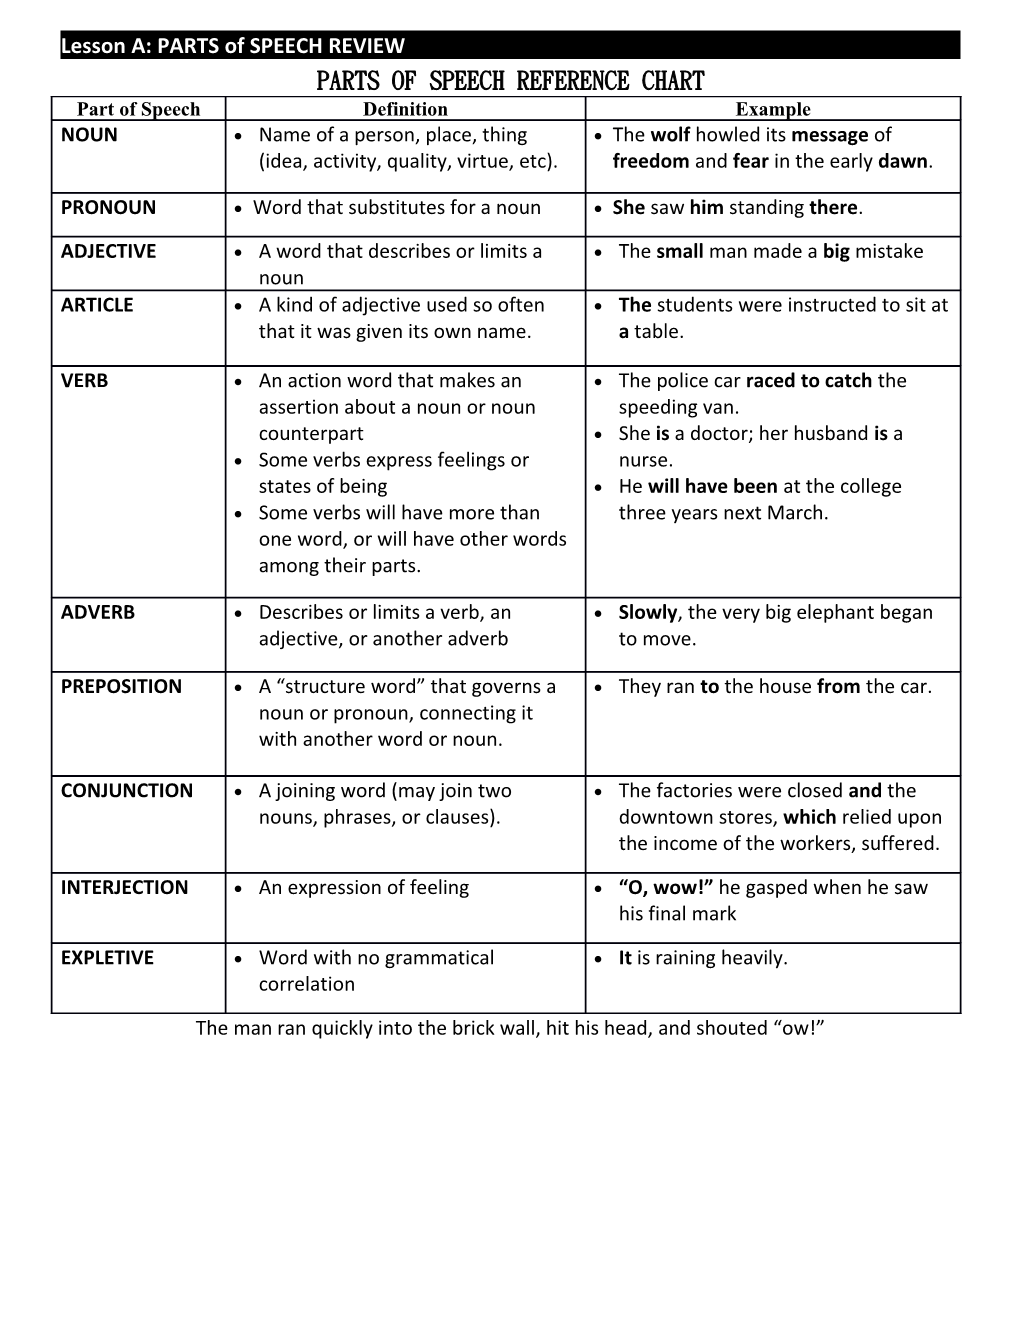 Parts of Speech Reference Chart